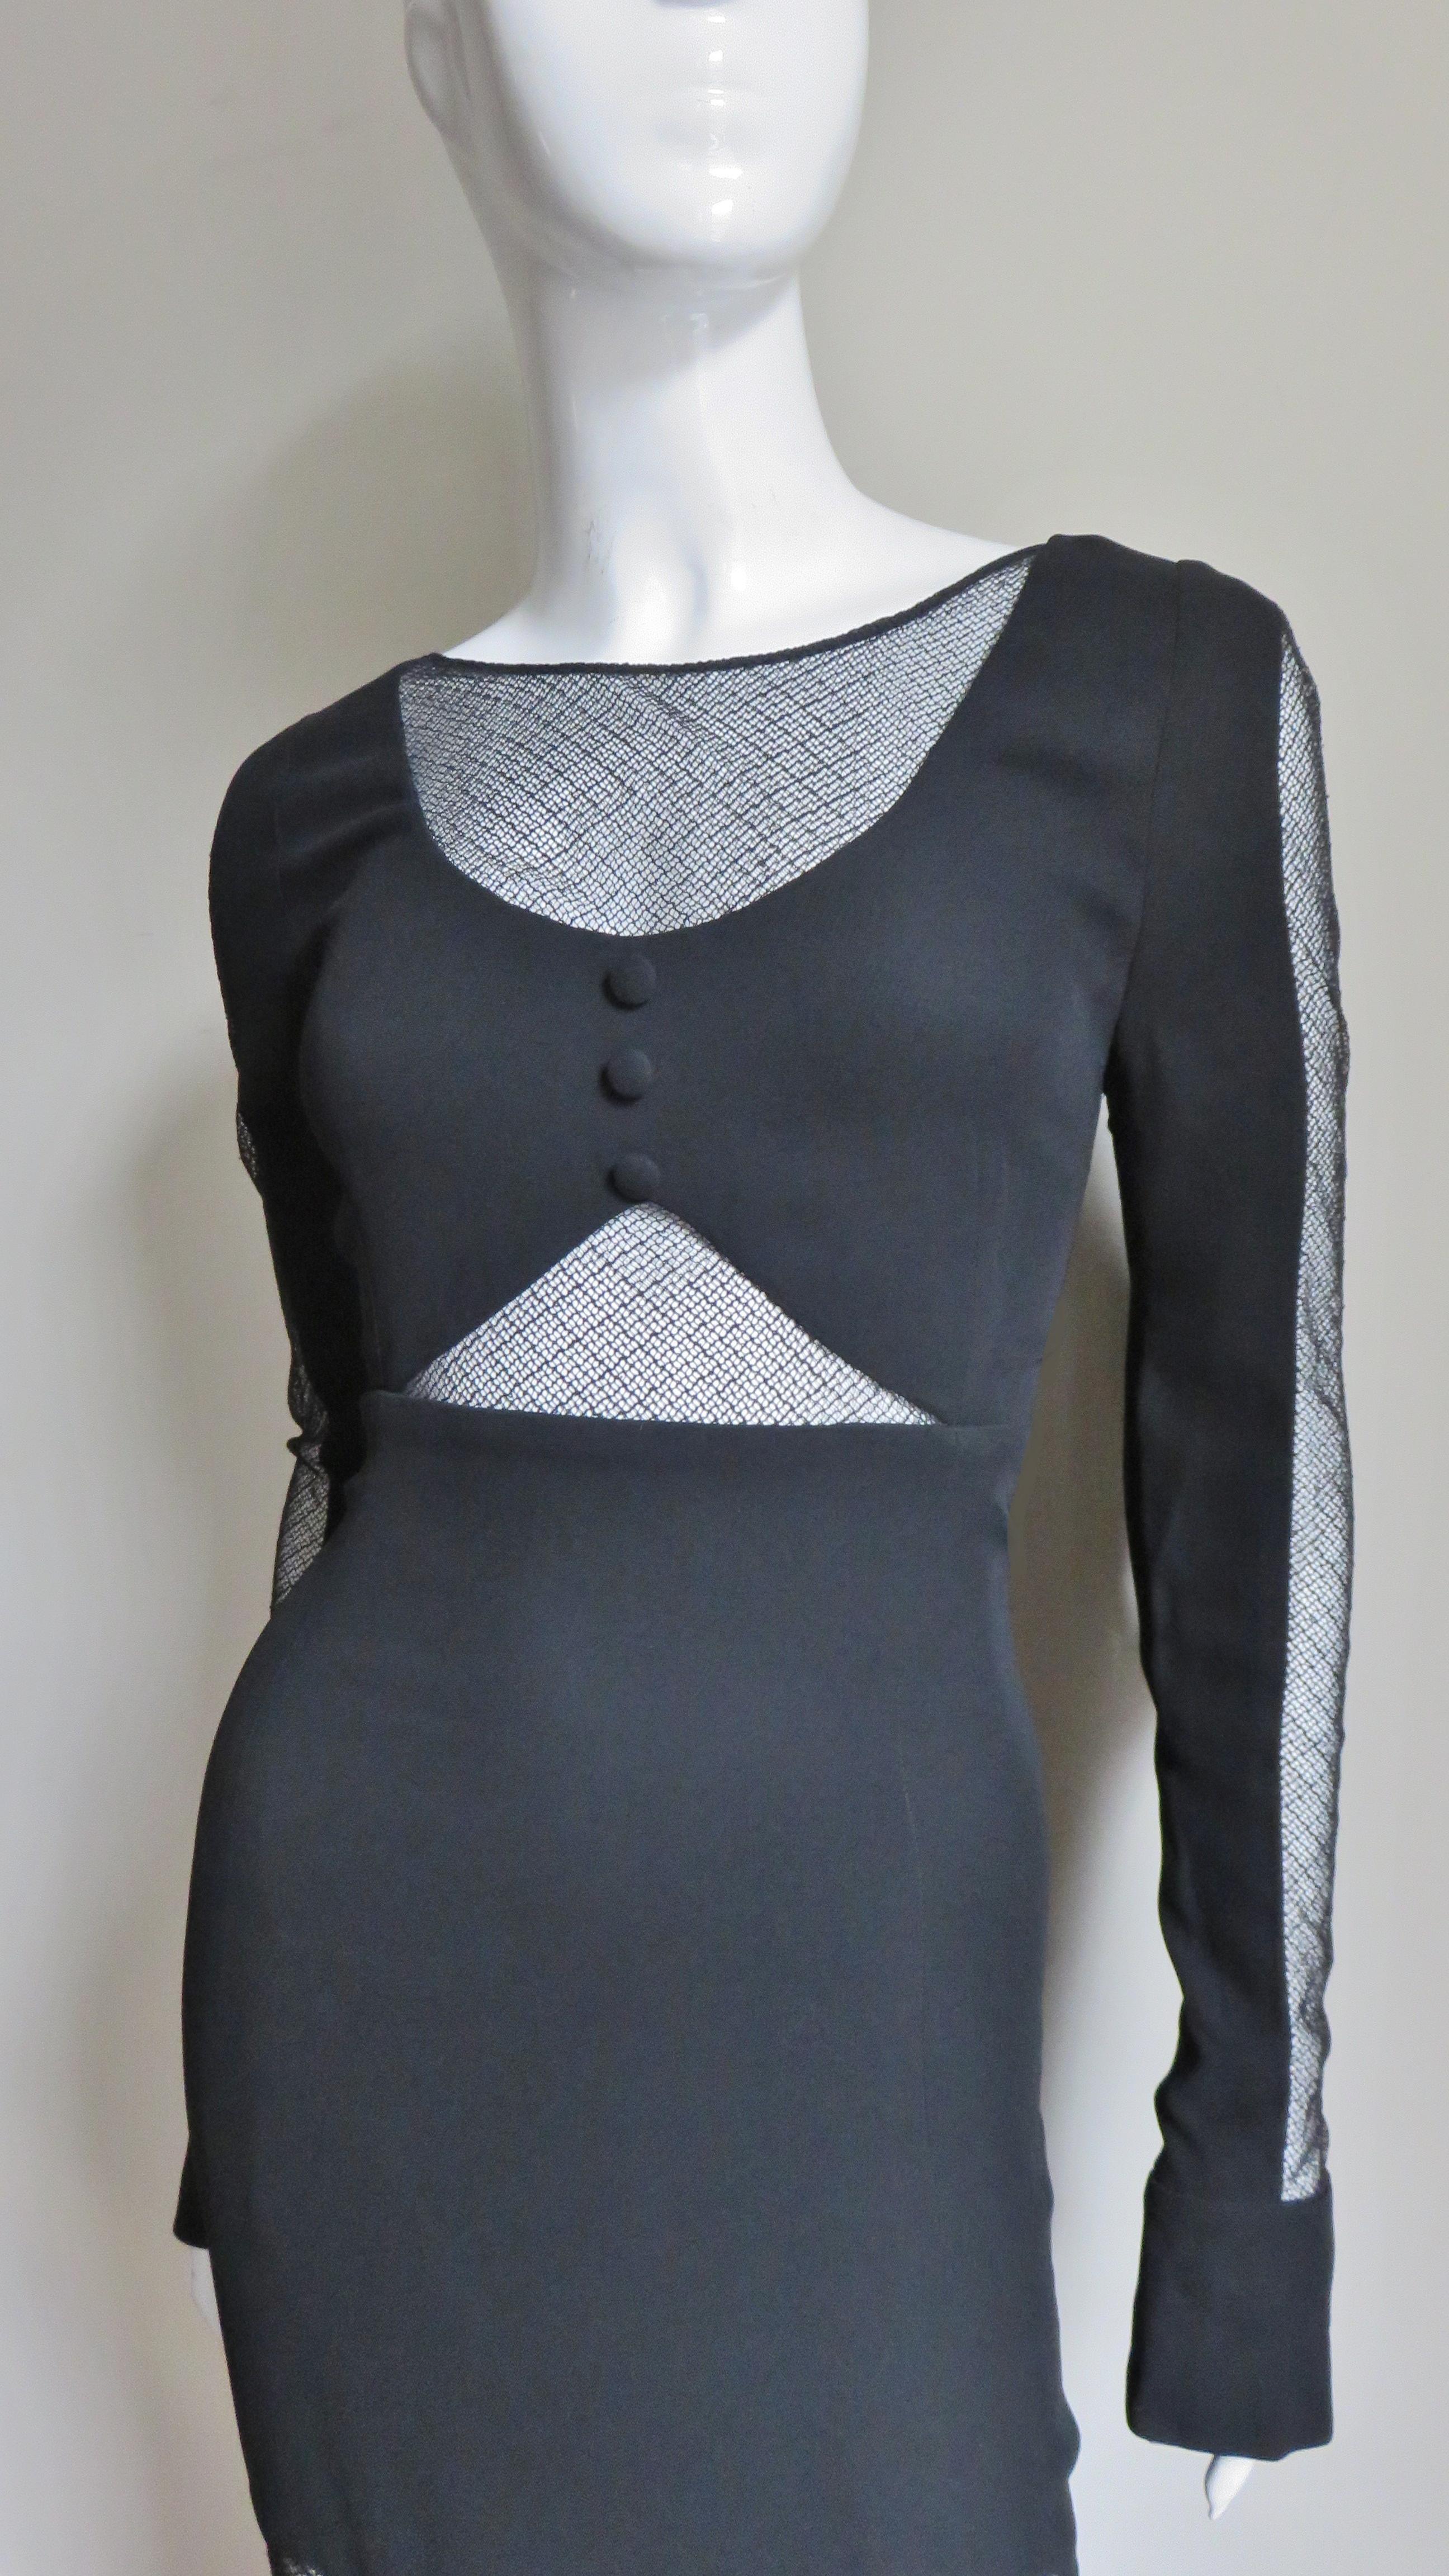 Karl Lagerfeld Dress with Cut outs 1980s In Good Condition For Sale In Water Mill, NY